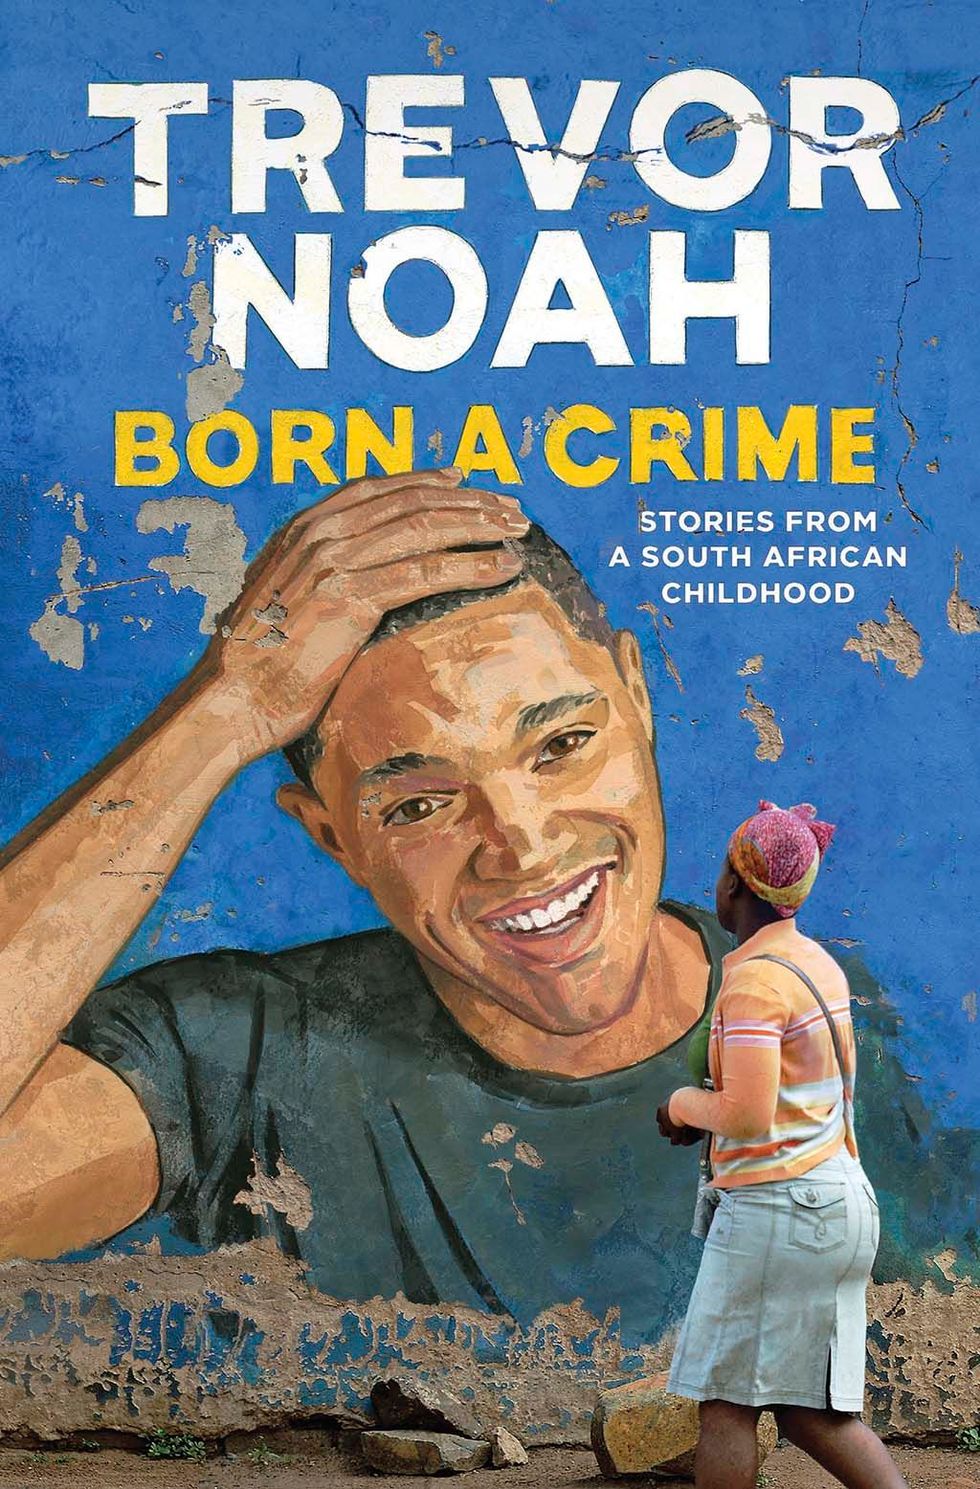 Trevor Noah’s Book Just Won the Thurber Prize for American Humor